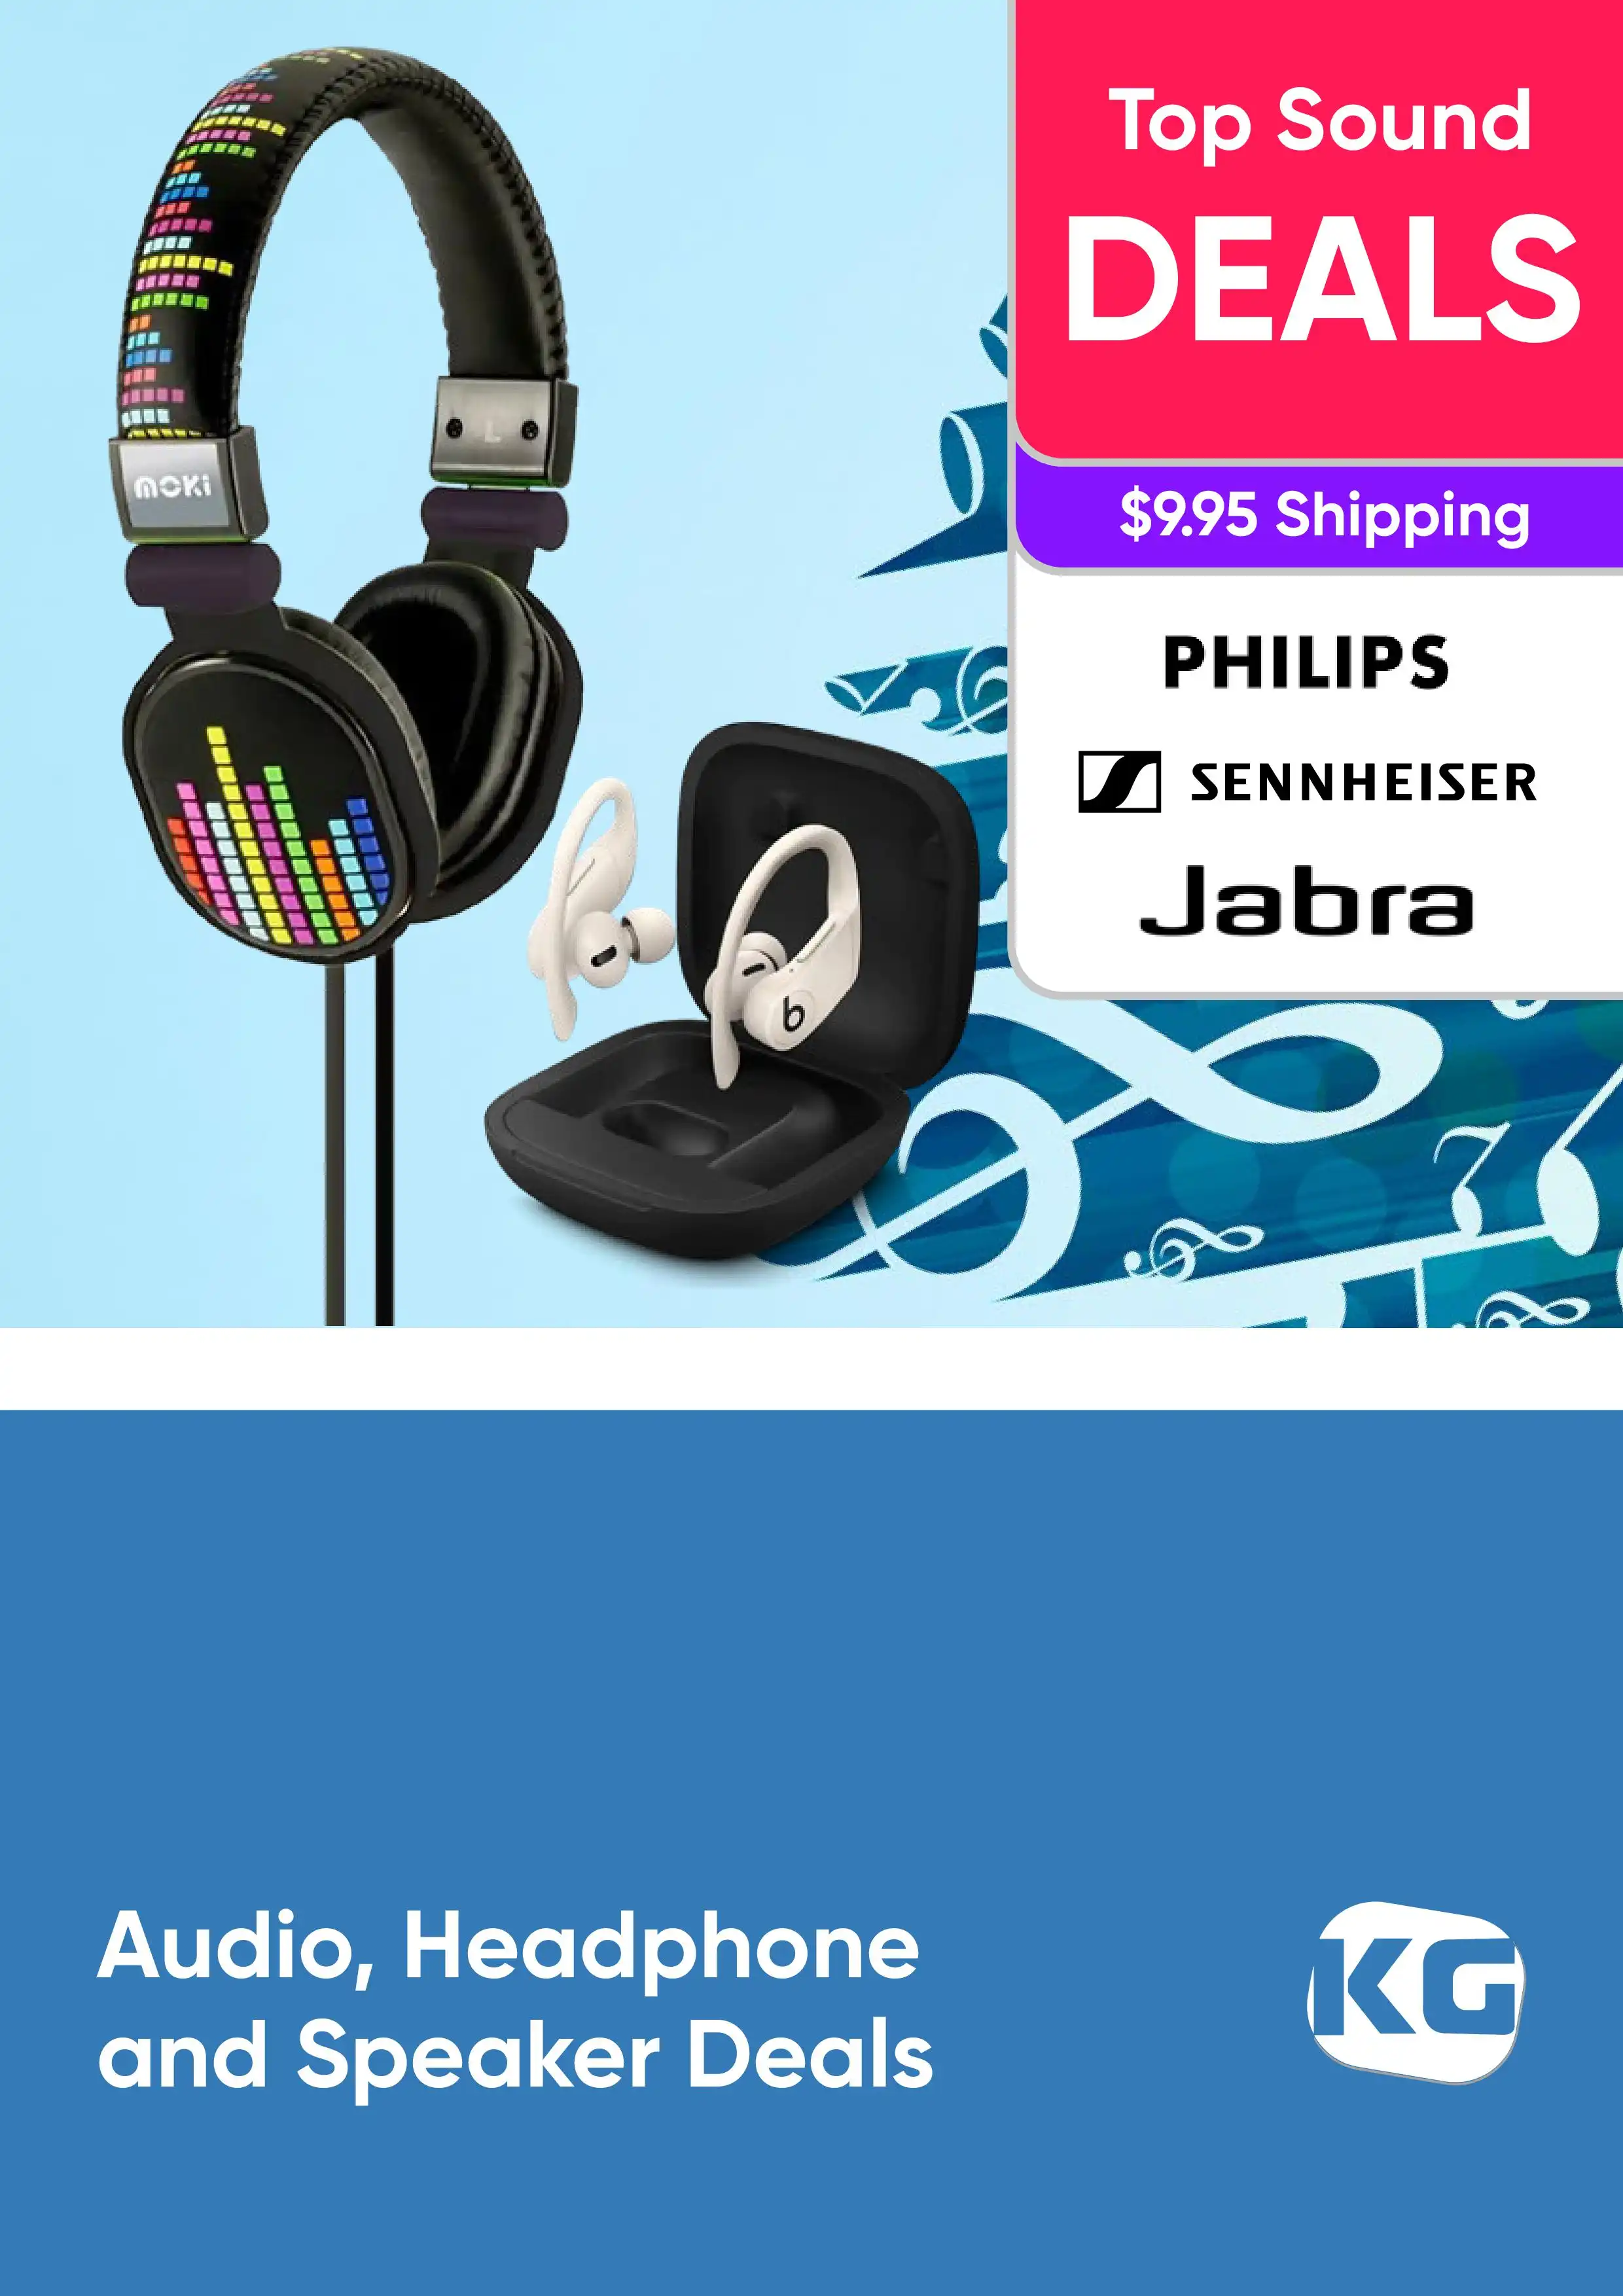 Audio, Headphone and Speaker Deals - Shop Our Range of Audio Products and Accessories